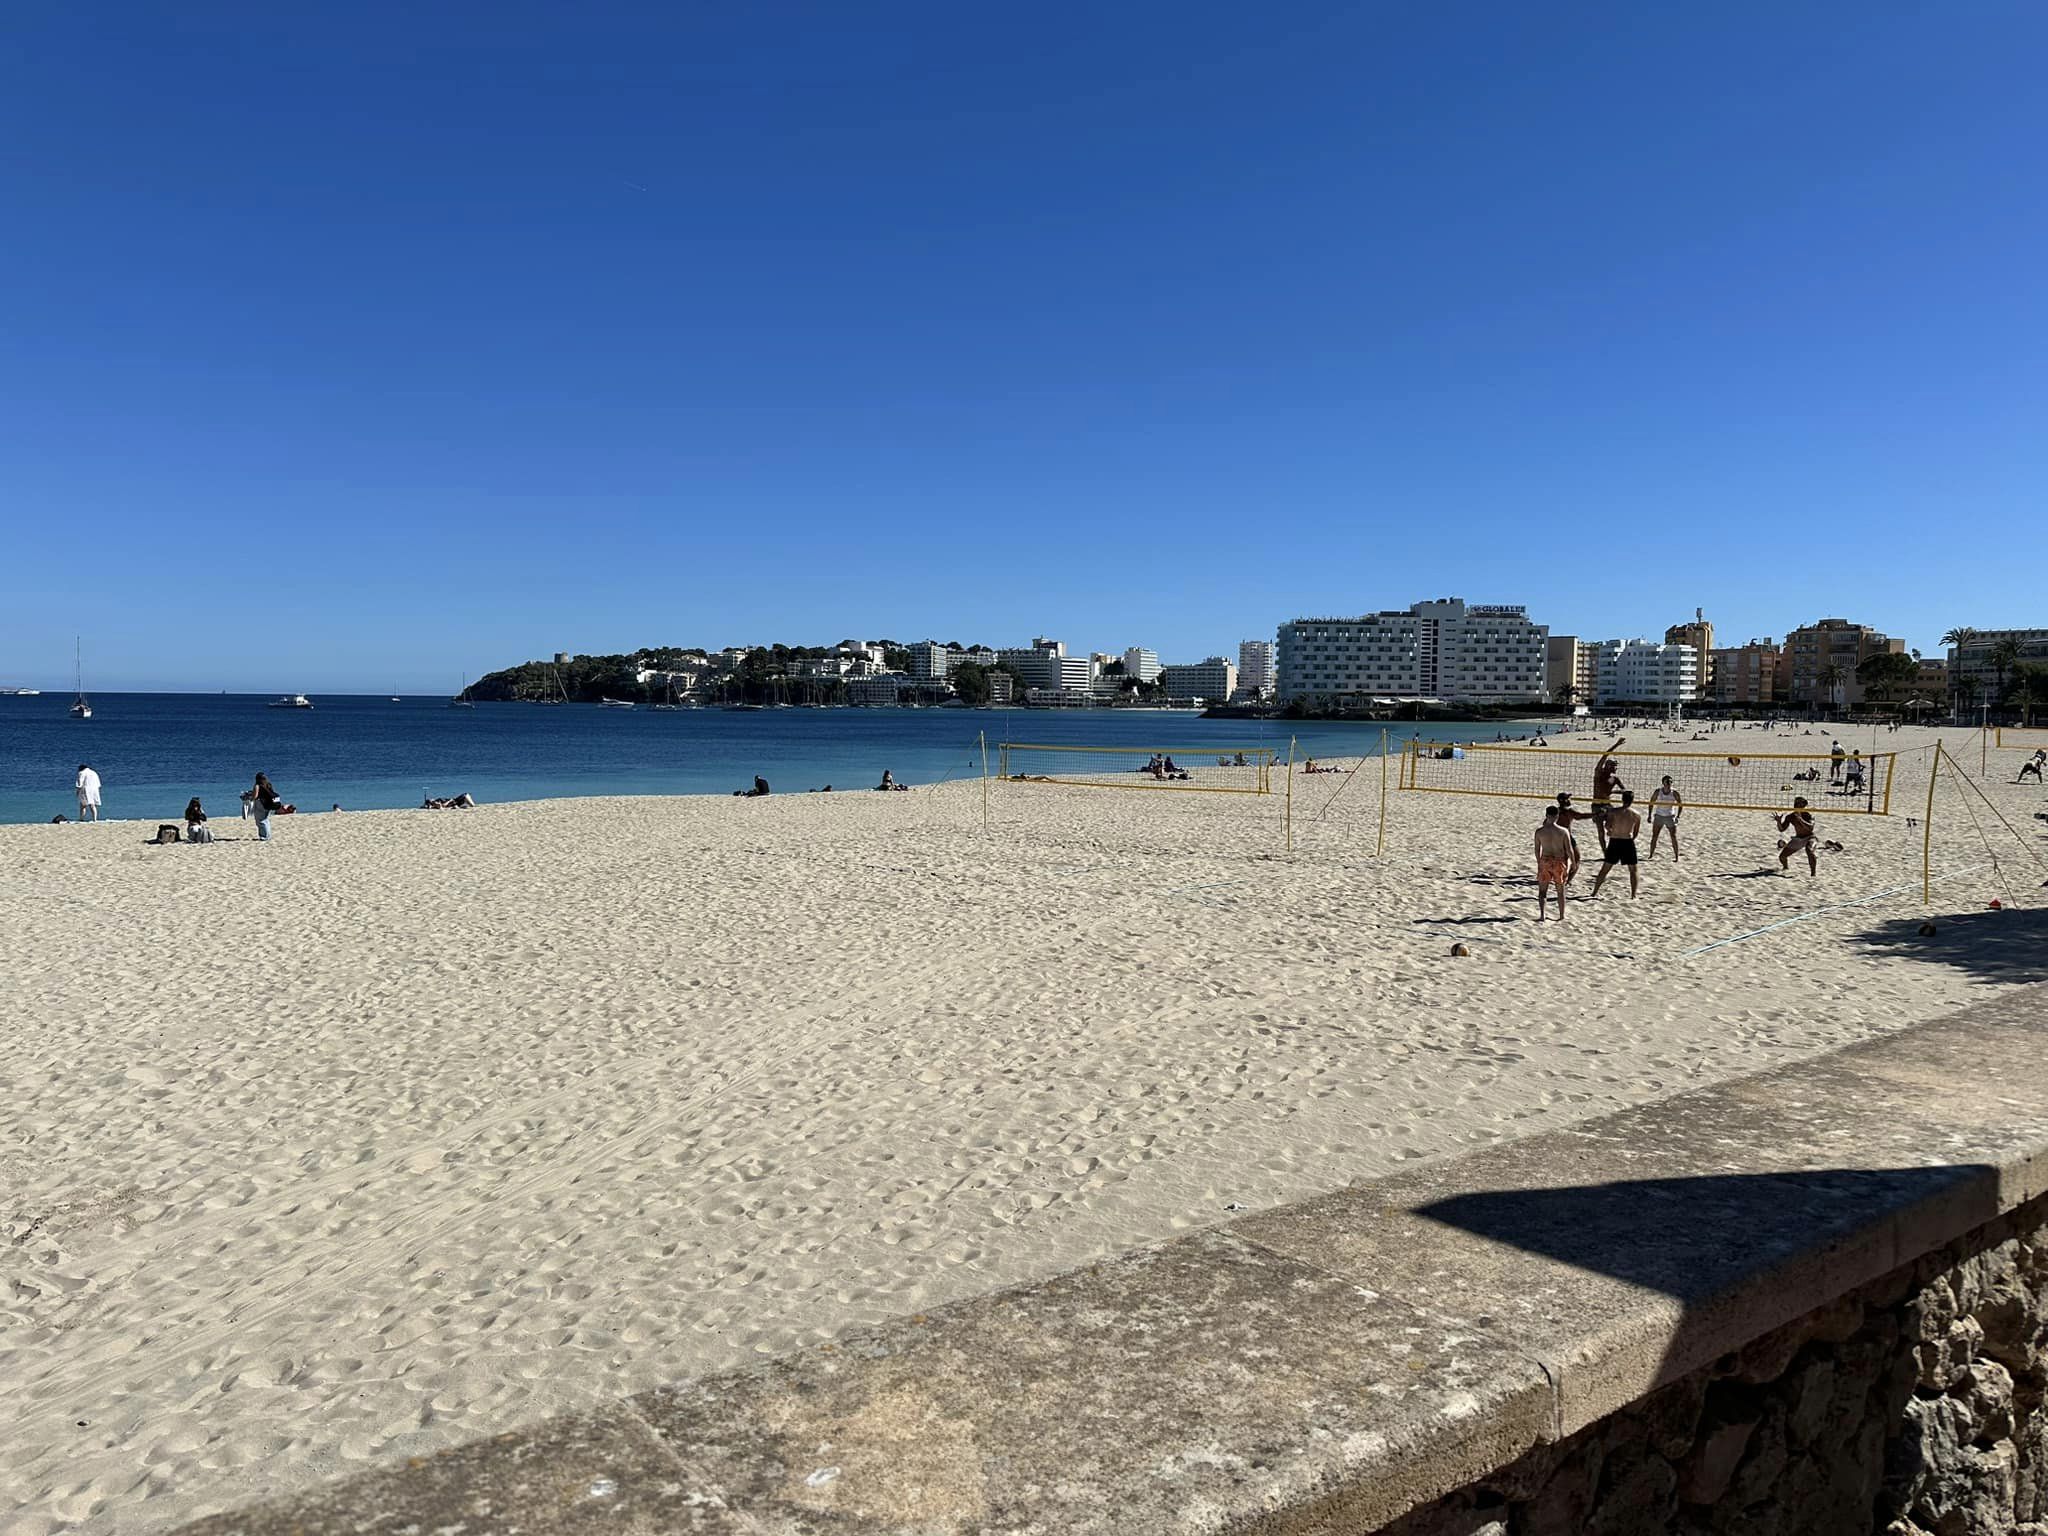 Italian expat, 20, is arrested 'after raping a British tourist on a beach' in Spain's Mallorca